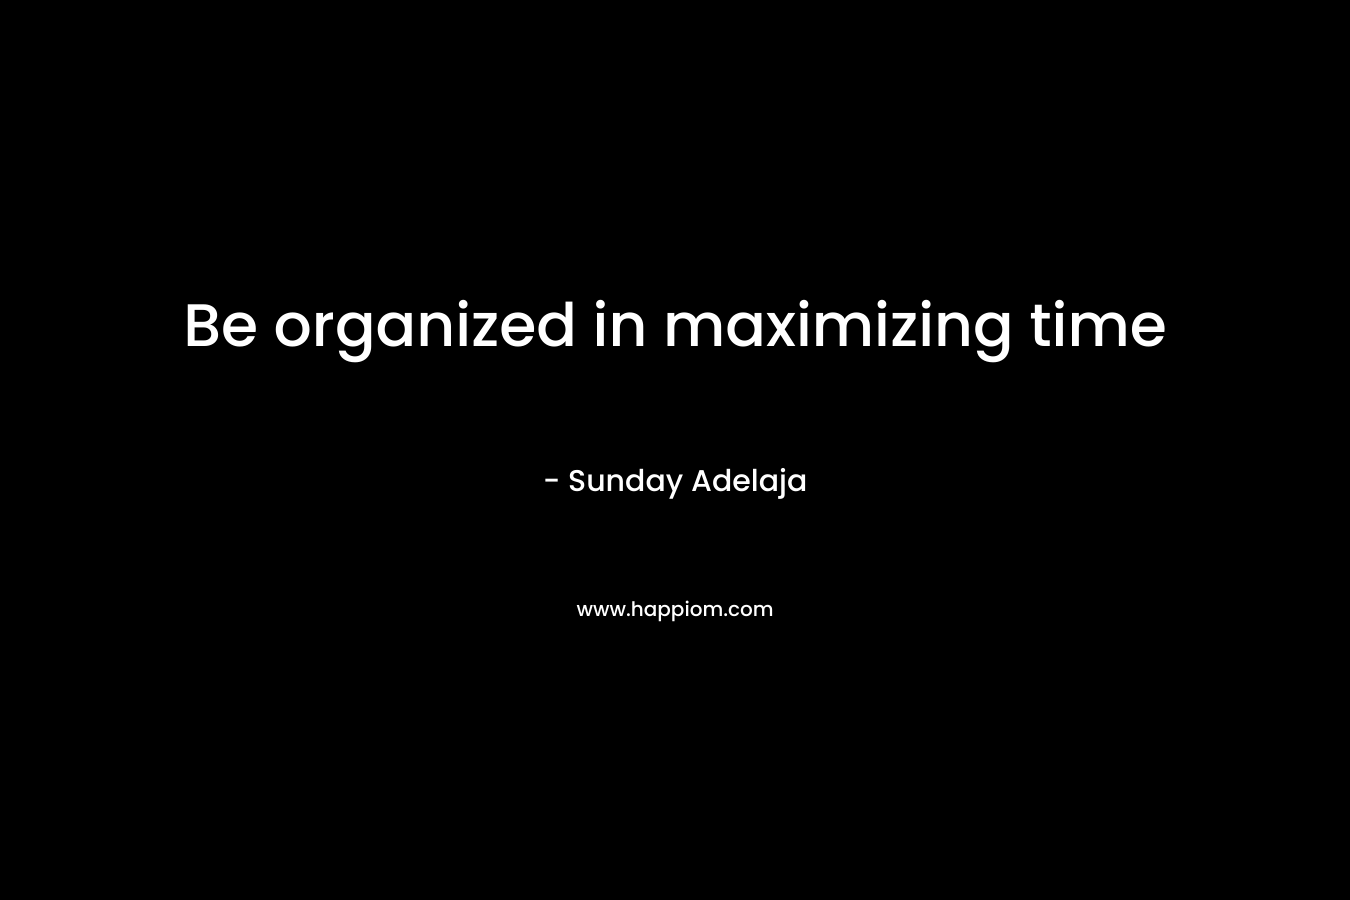 Be organized in maximizing time